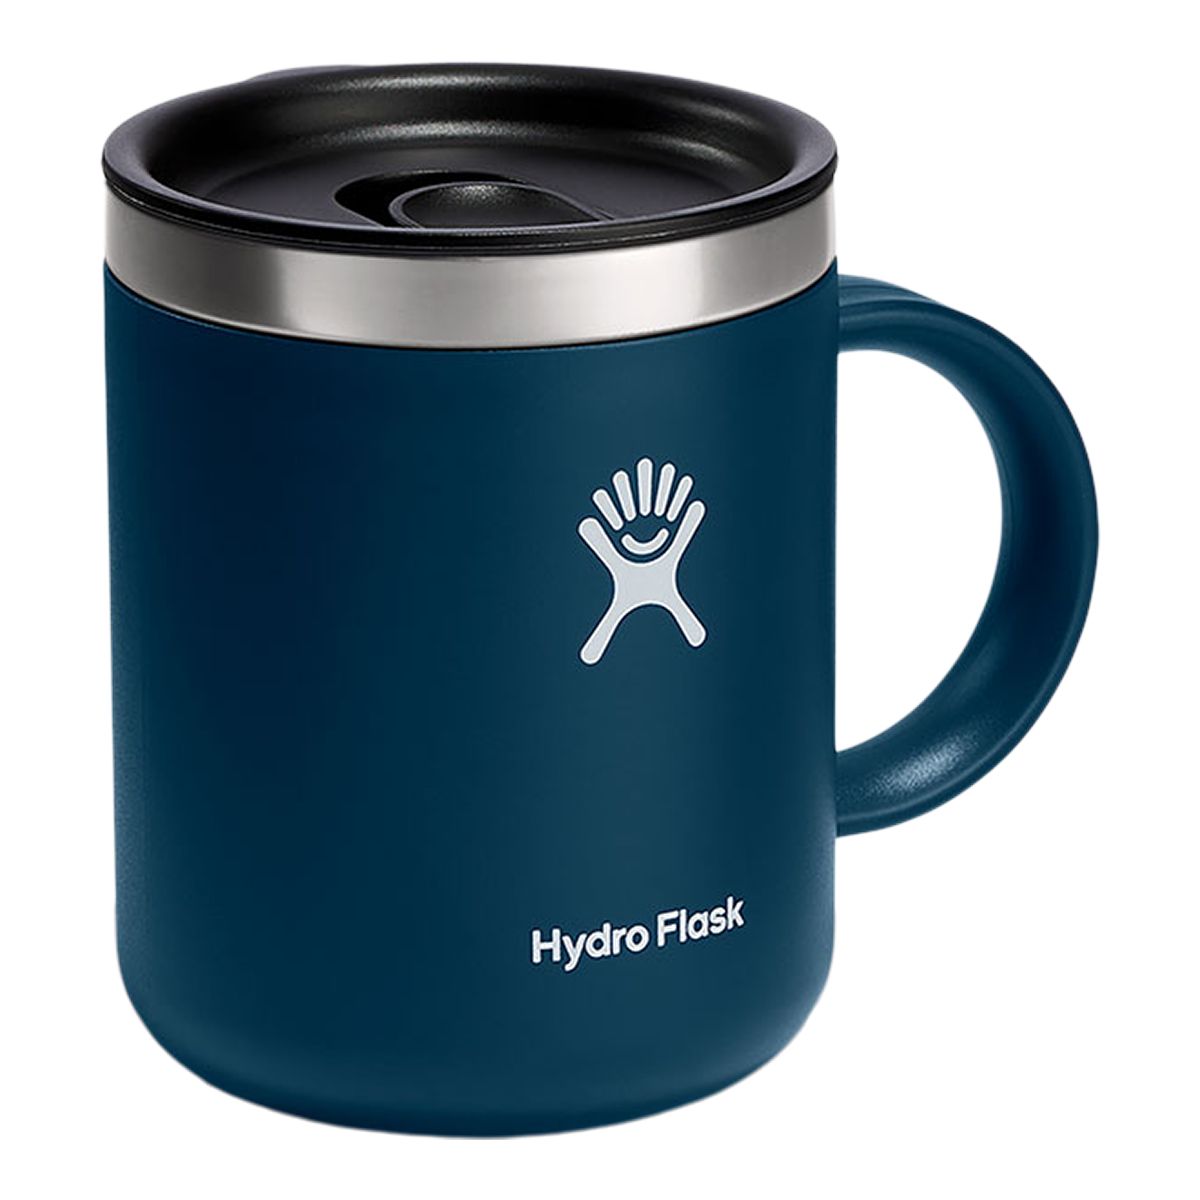 Image of Hydro Flask 12 oz Insulated Stainless Coffee Mug with Press-In Lid